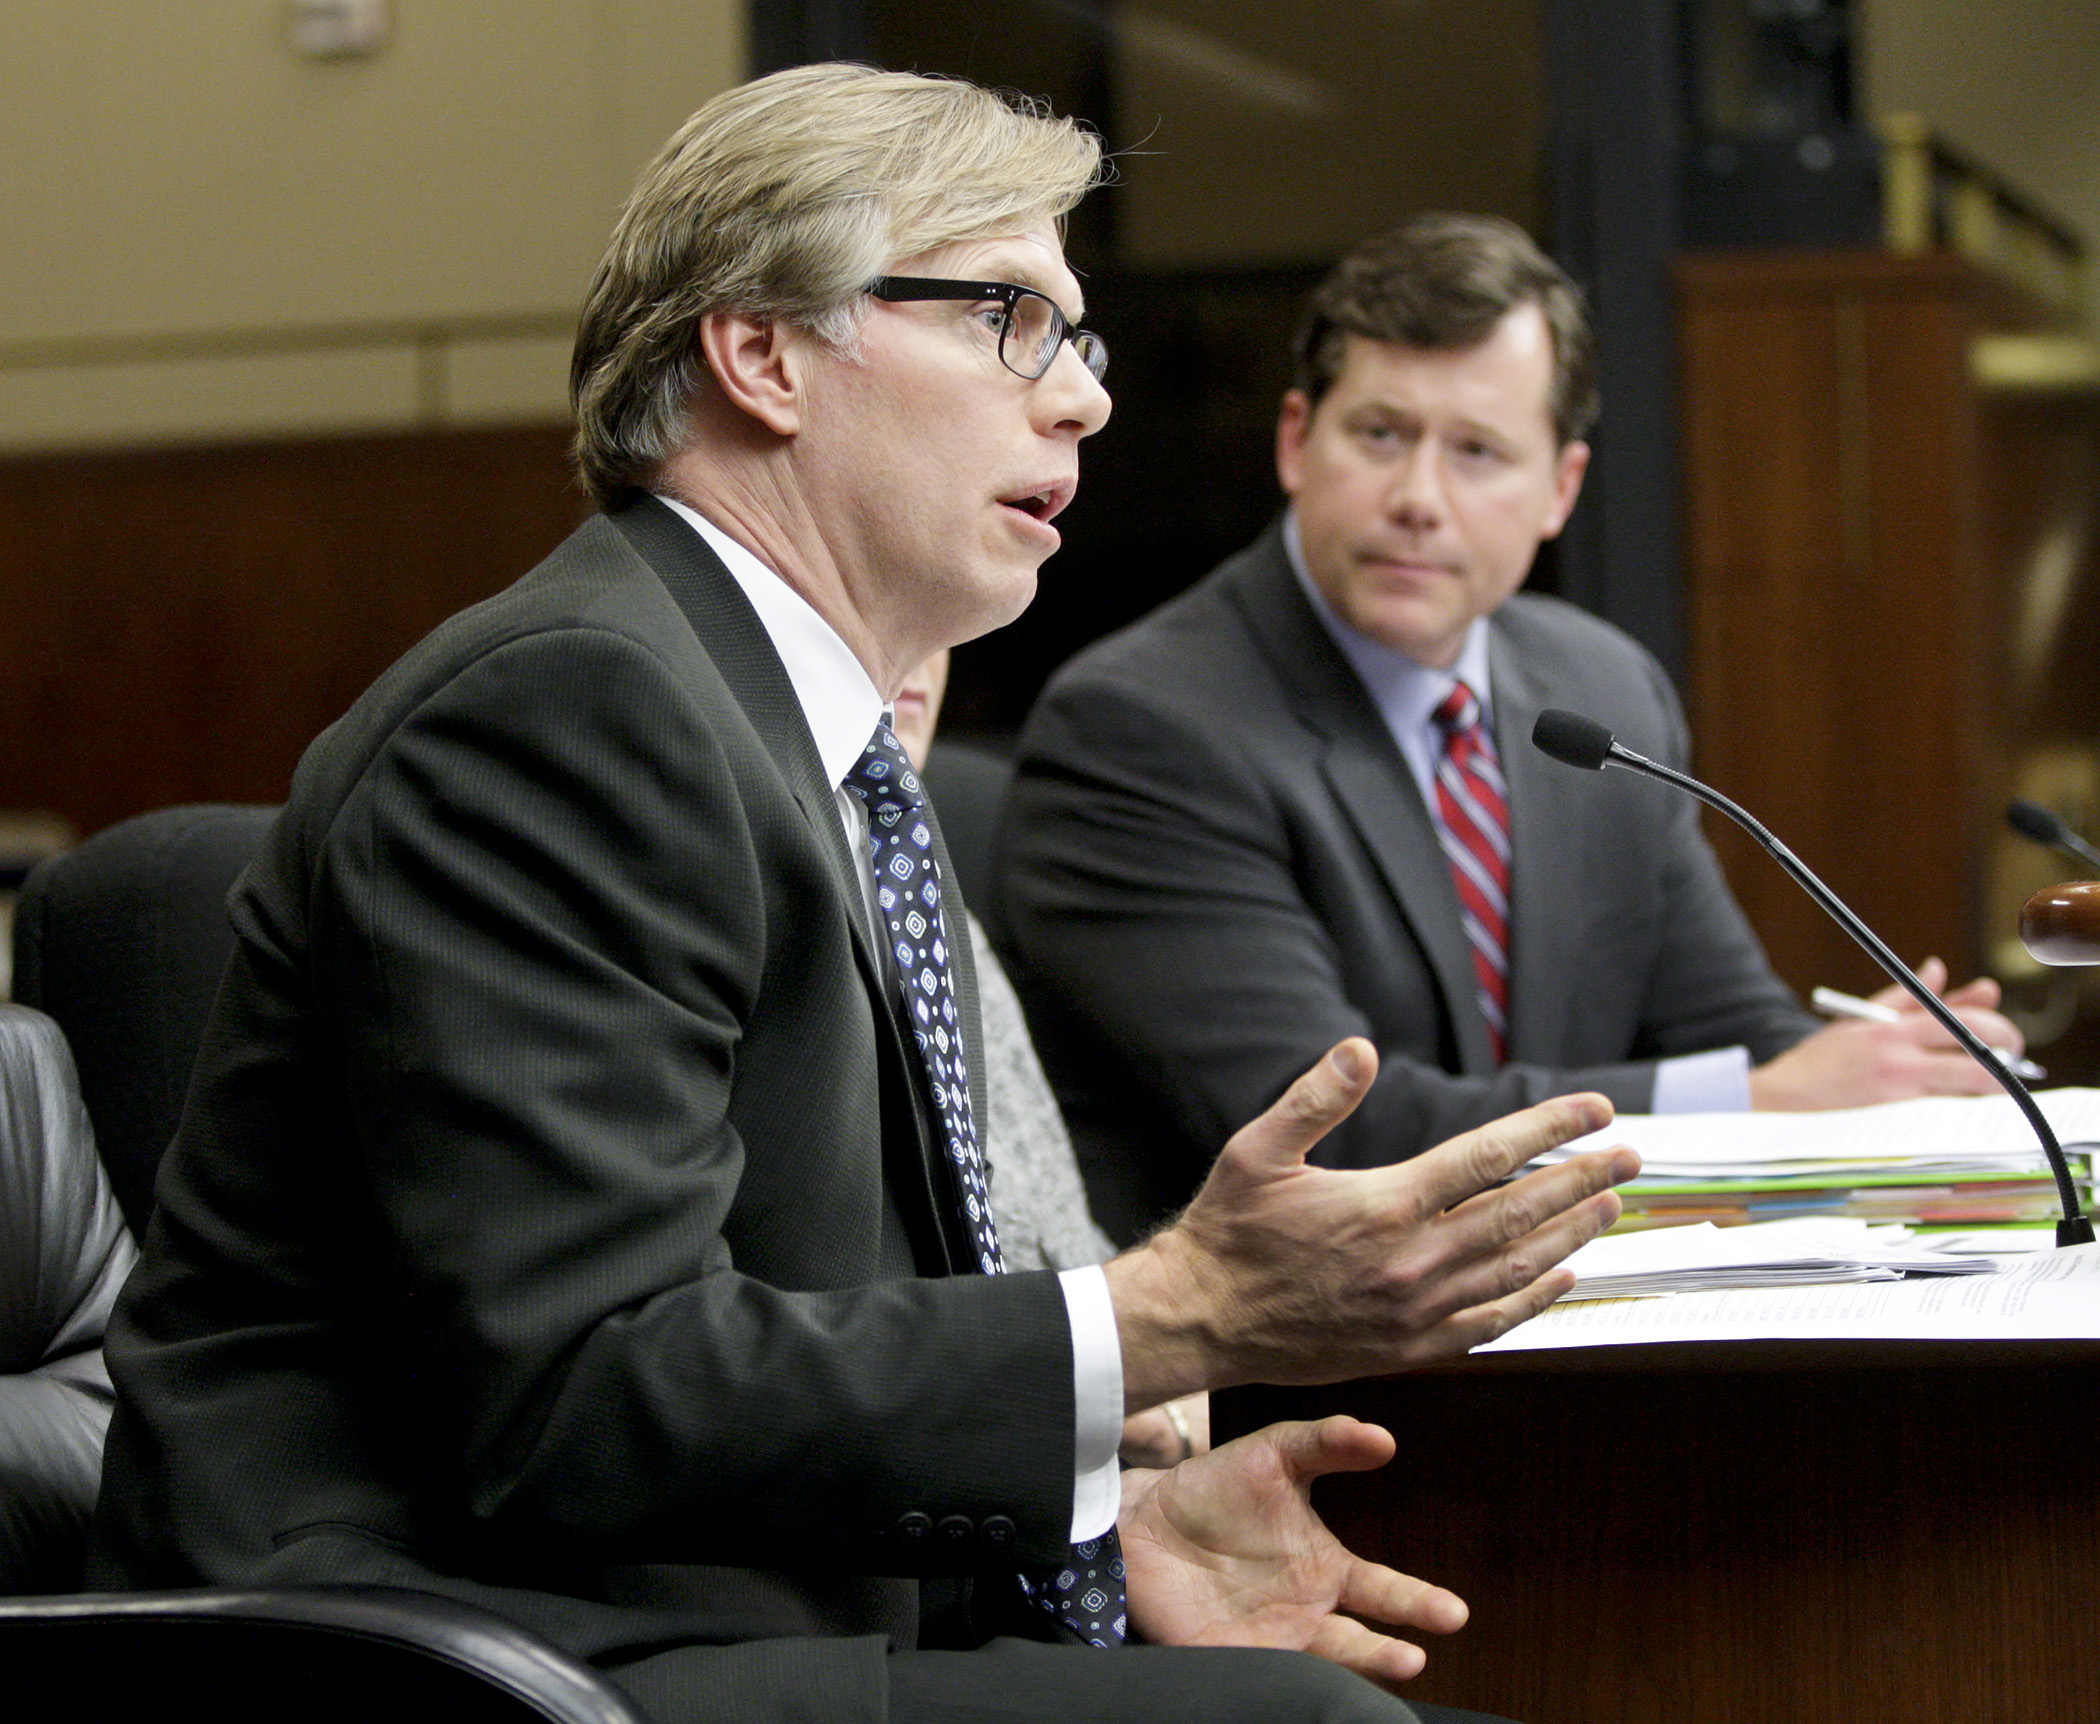 Paul Meekin, chief information officer for MN.IT Services, answers a members question during May 11 testimony in the House Ways and Means Committee on HF3959, sponsored by Rep. Dennis Smith, right, which authorizes implementation of the Real ID act. Photo by Paul Battaglia